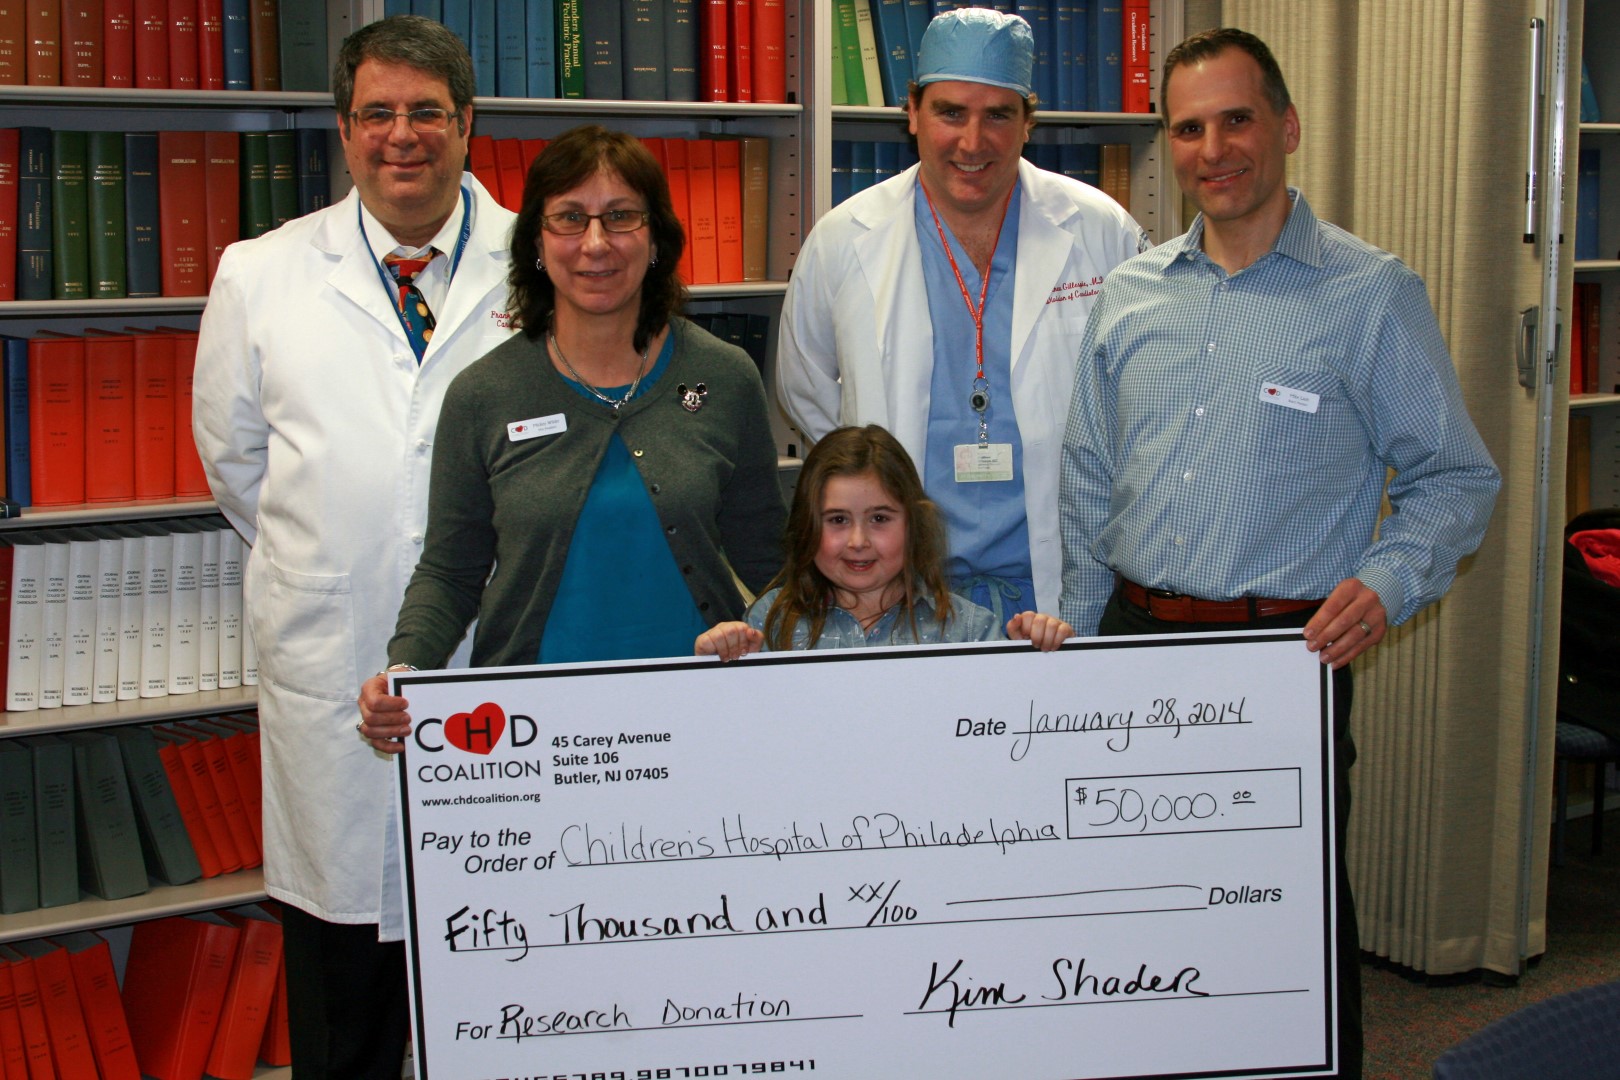 CHD Coalition Donates Over $50,000 for Lifesaving Research